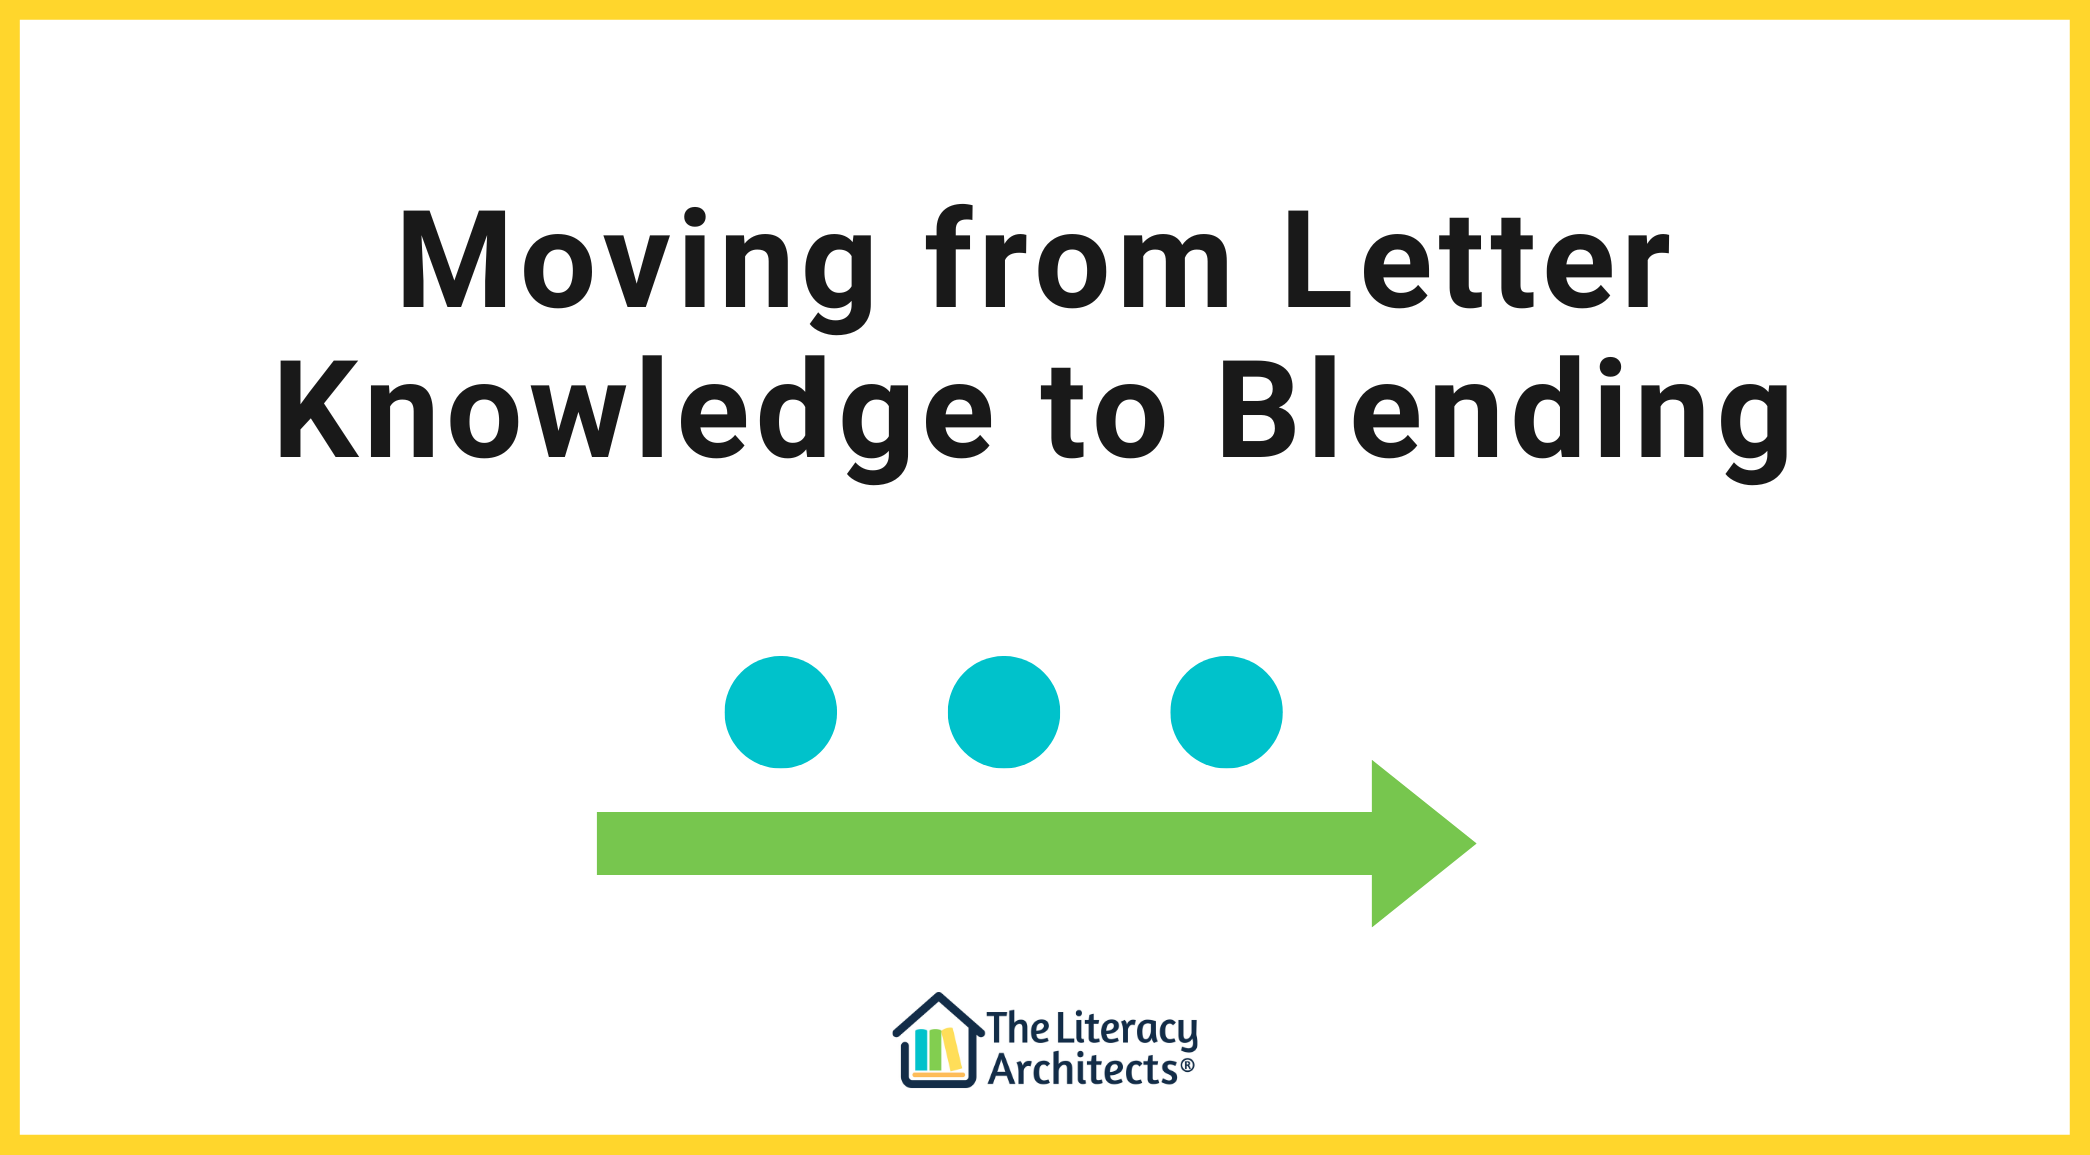 Moving from Letter Knowledge to Blending